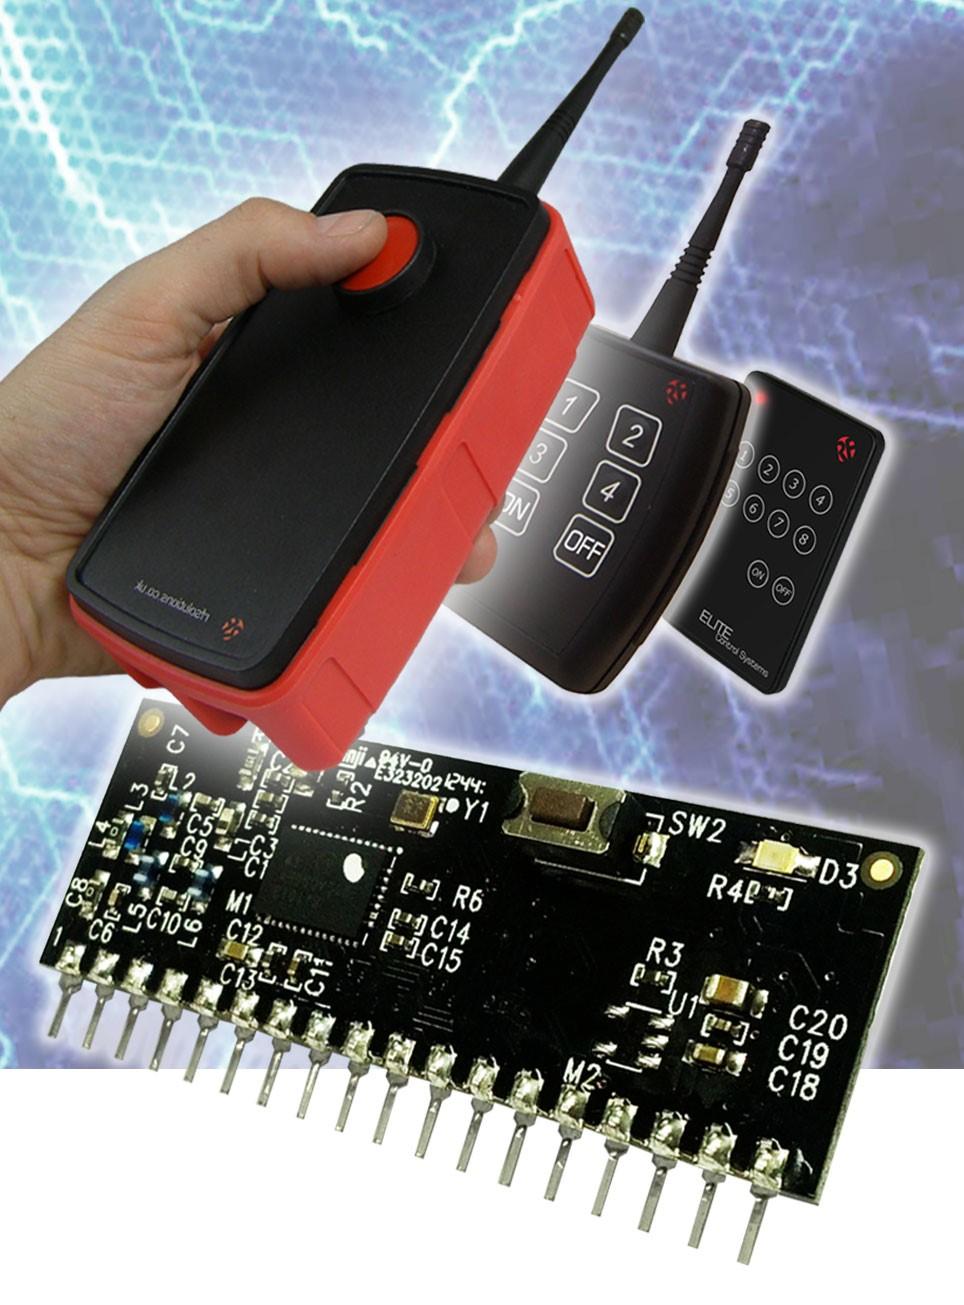 5MHz operating frequency Operates with SABRE ELITE ELITE-X Applications Remote Control Remote Networking Remote Switching Remote Traffic Lights Description The BRAVO-T